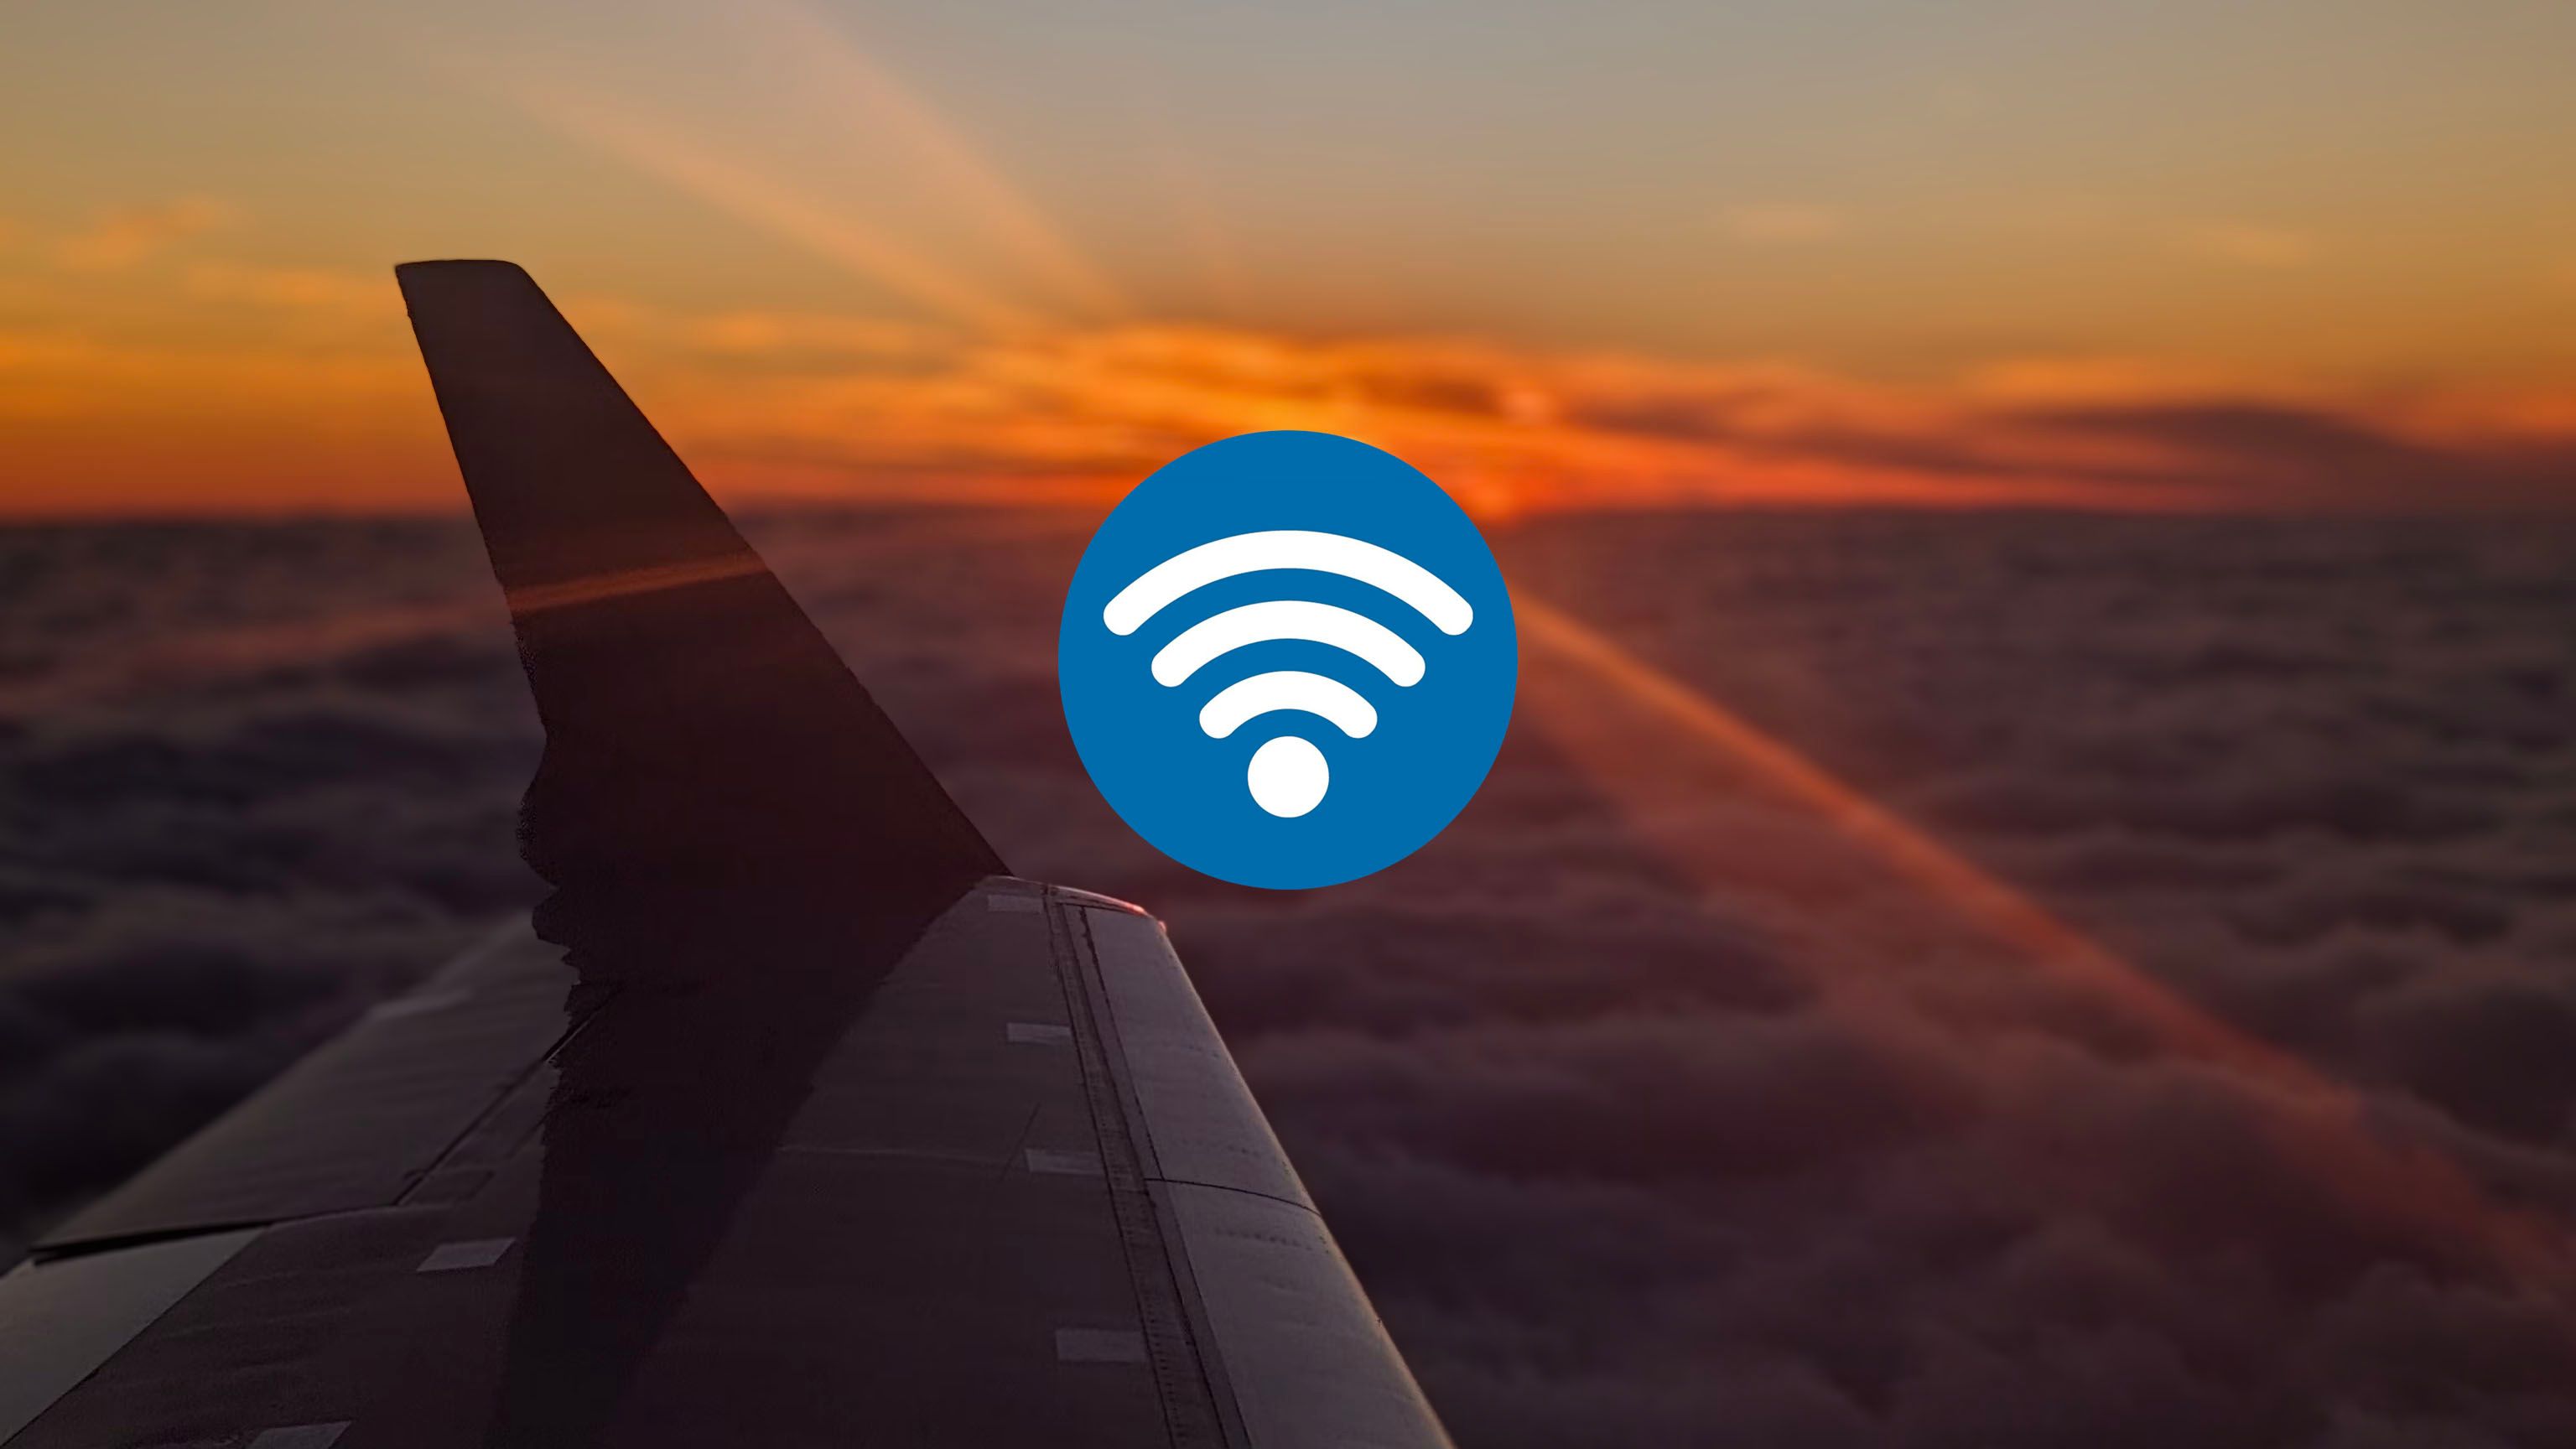 Wi-Fi logo and photo of an sunset seen from an airplane